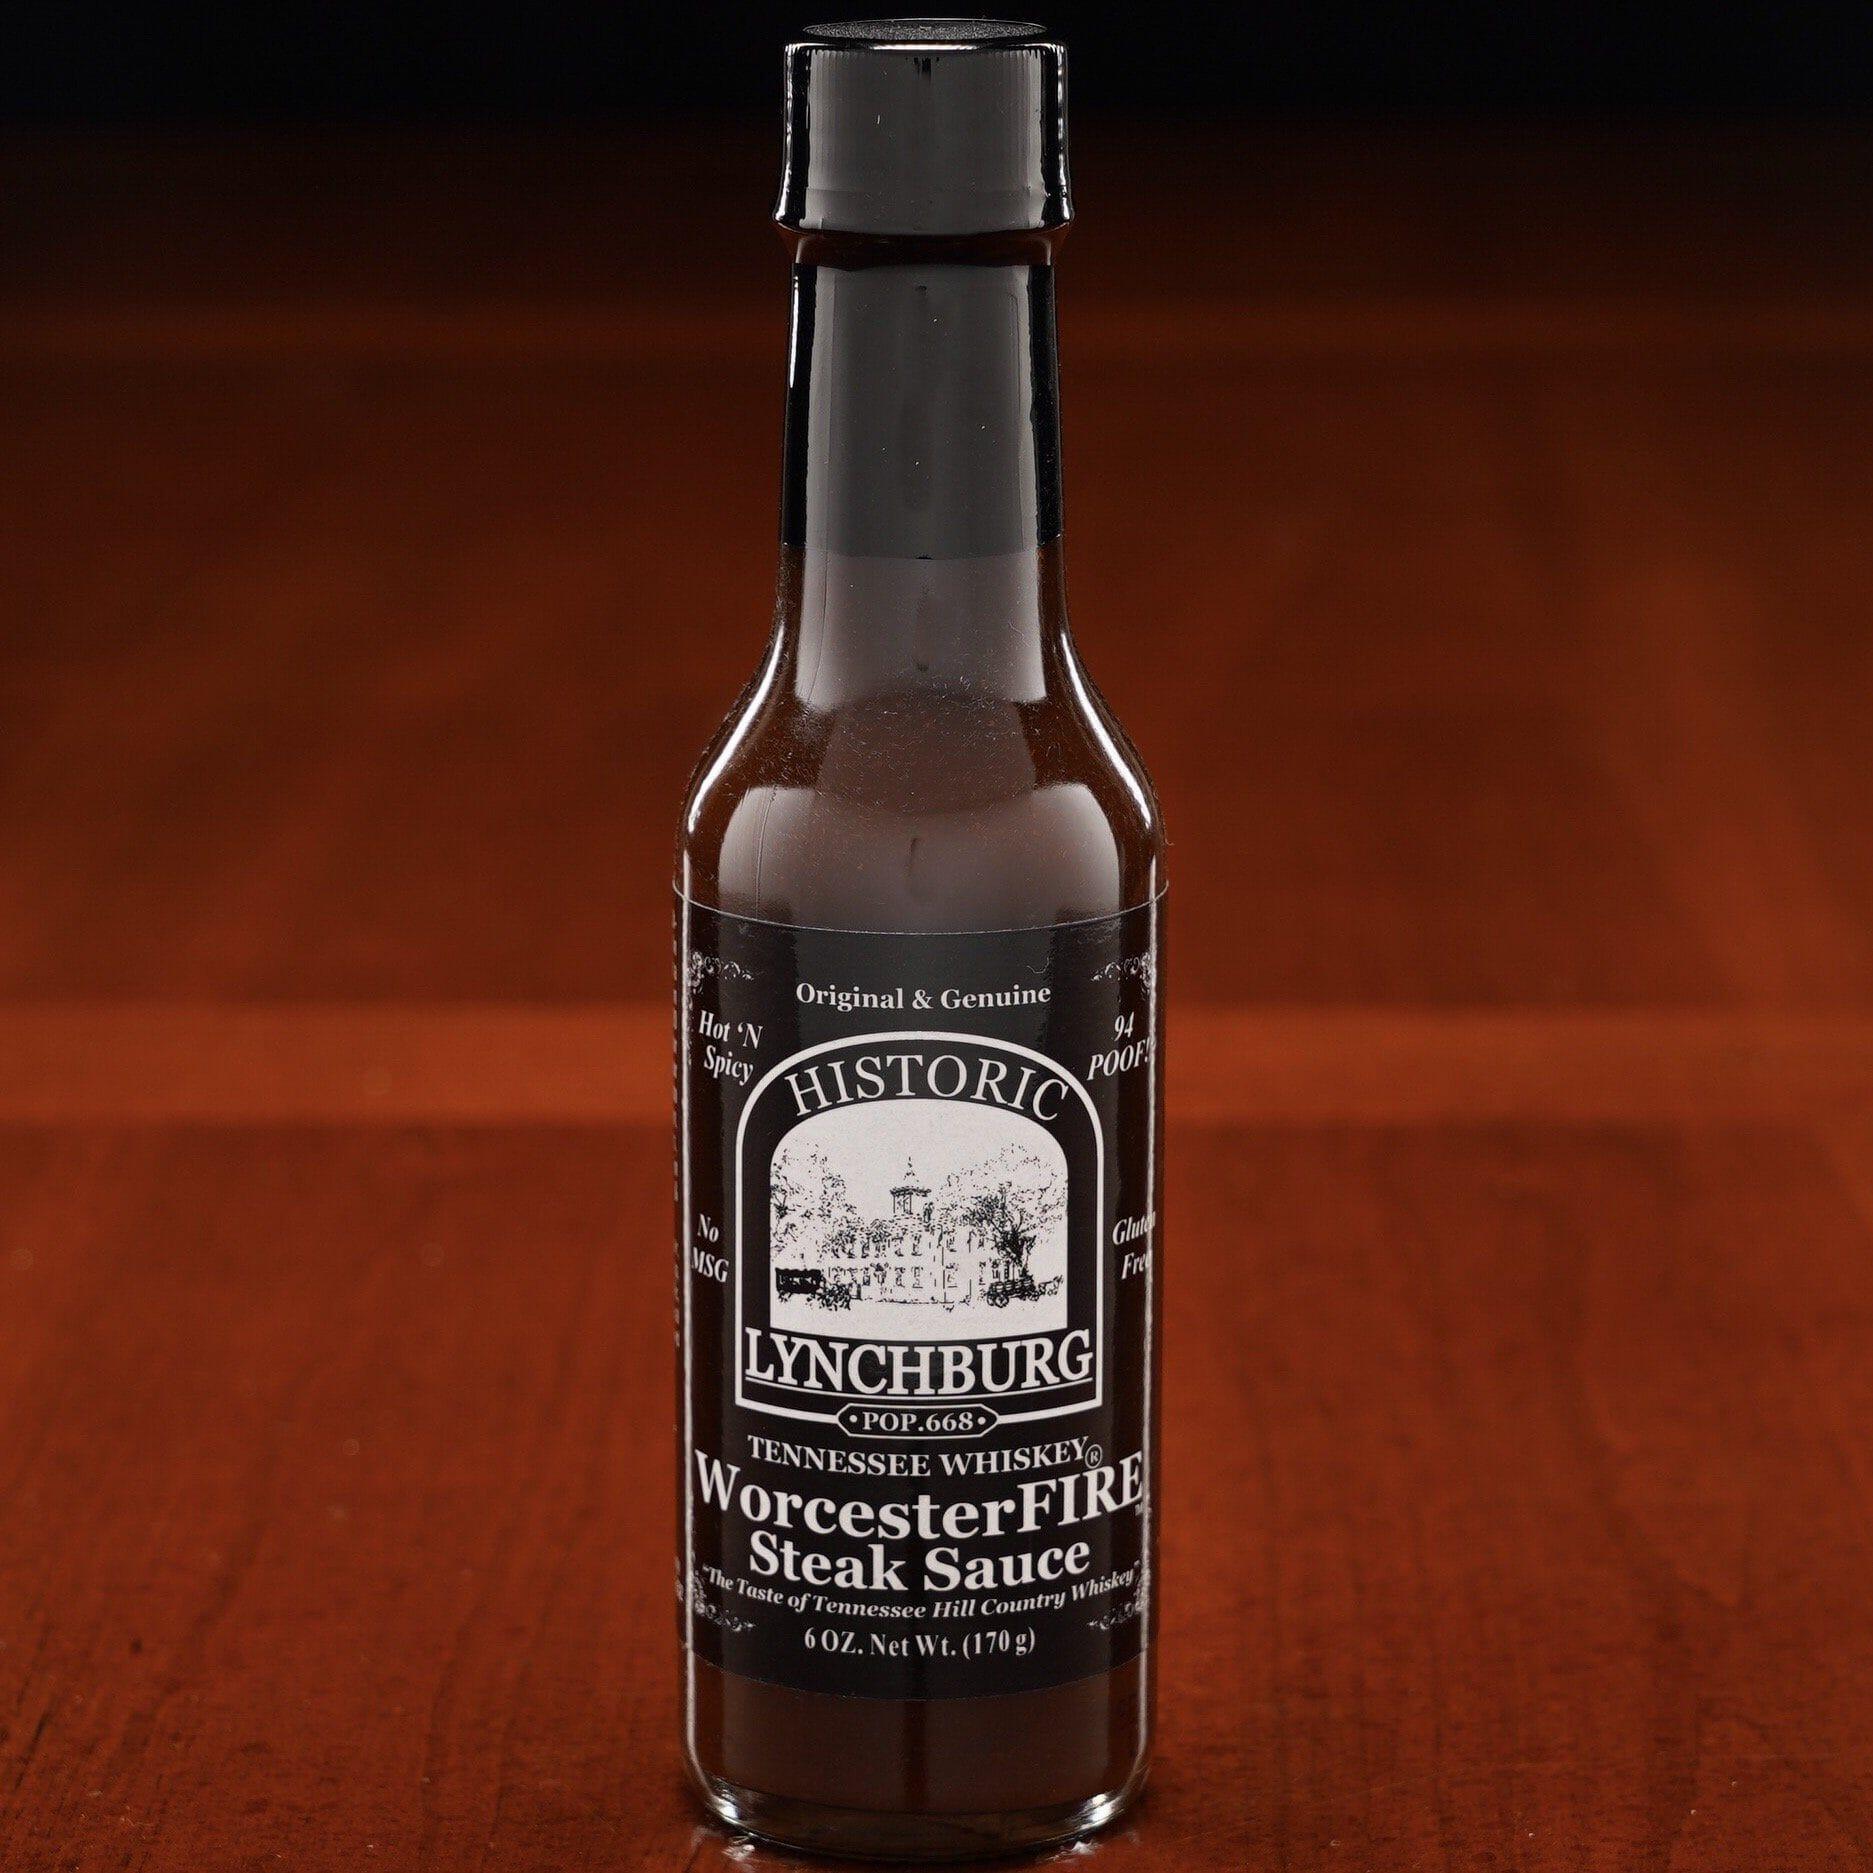 Historic Lynchburg WorcesterFIRE Steak Sauce made with Jack Daniels - The Whiskey Cave